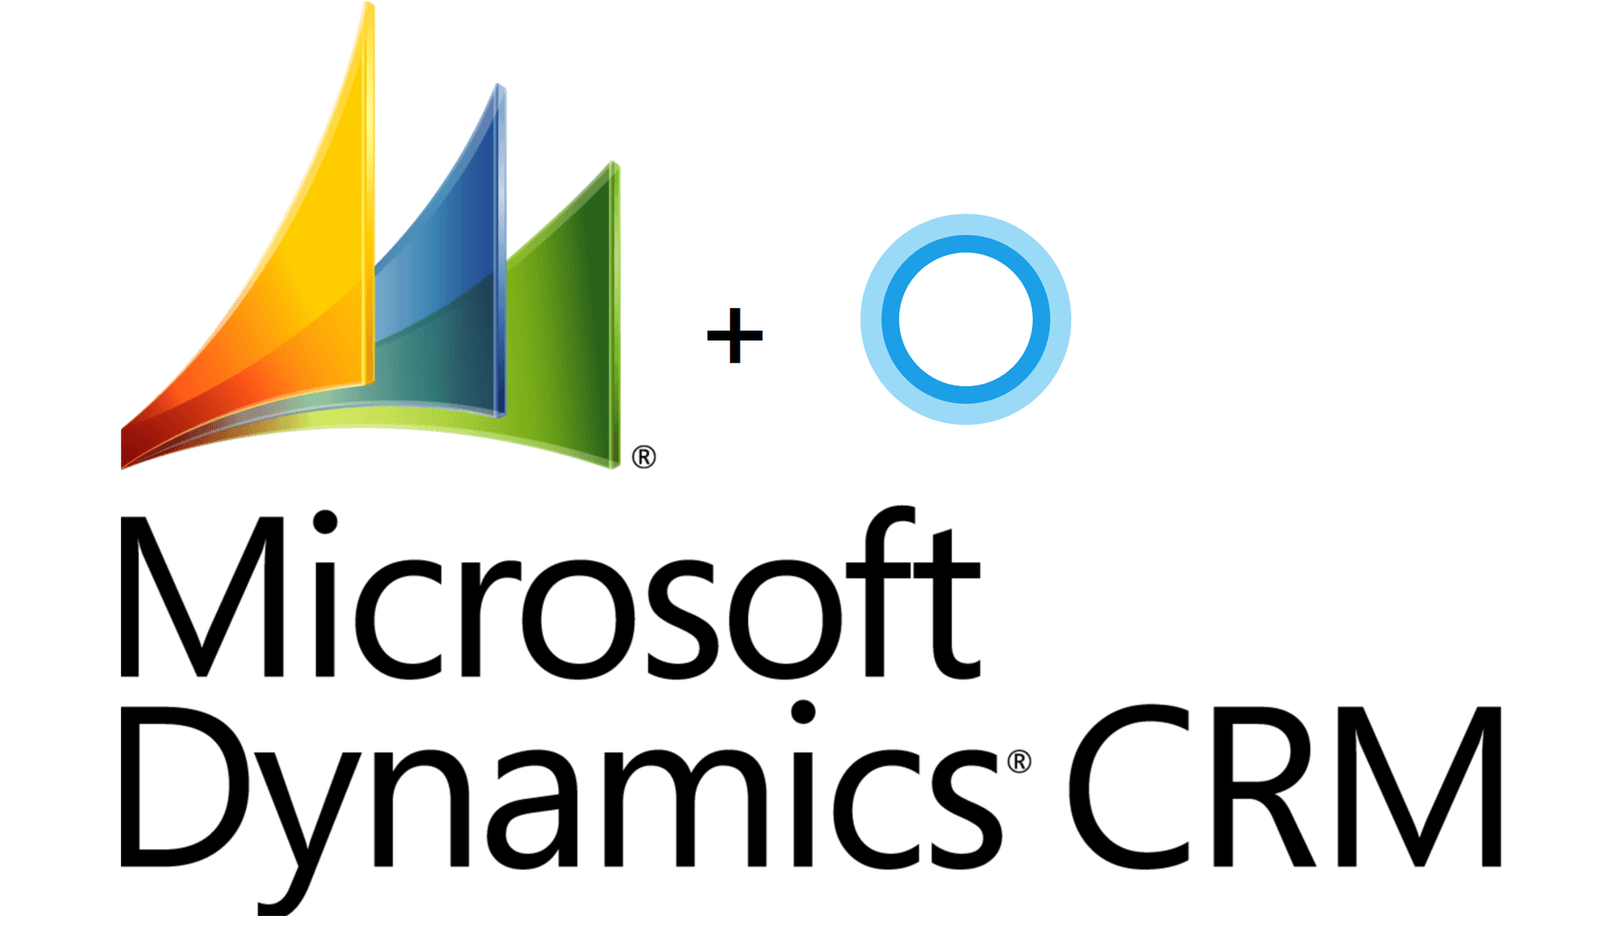 Microsoft Cortana Logo - Microsoft adds Dynamics CRM support to Cortana through Connected ...